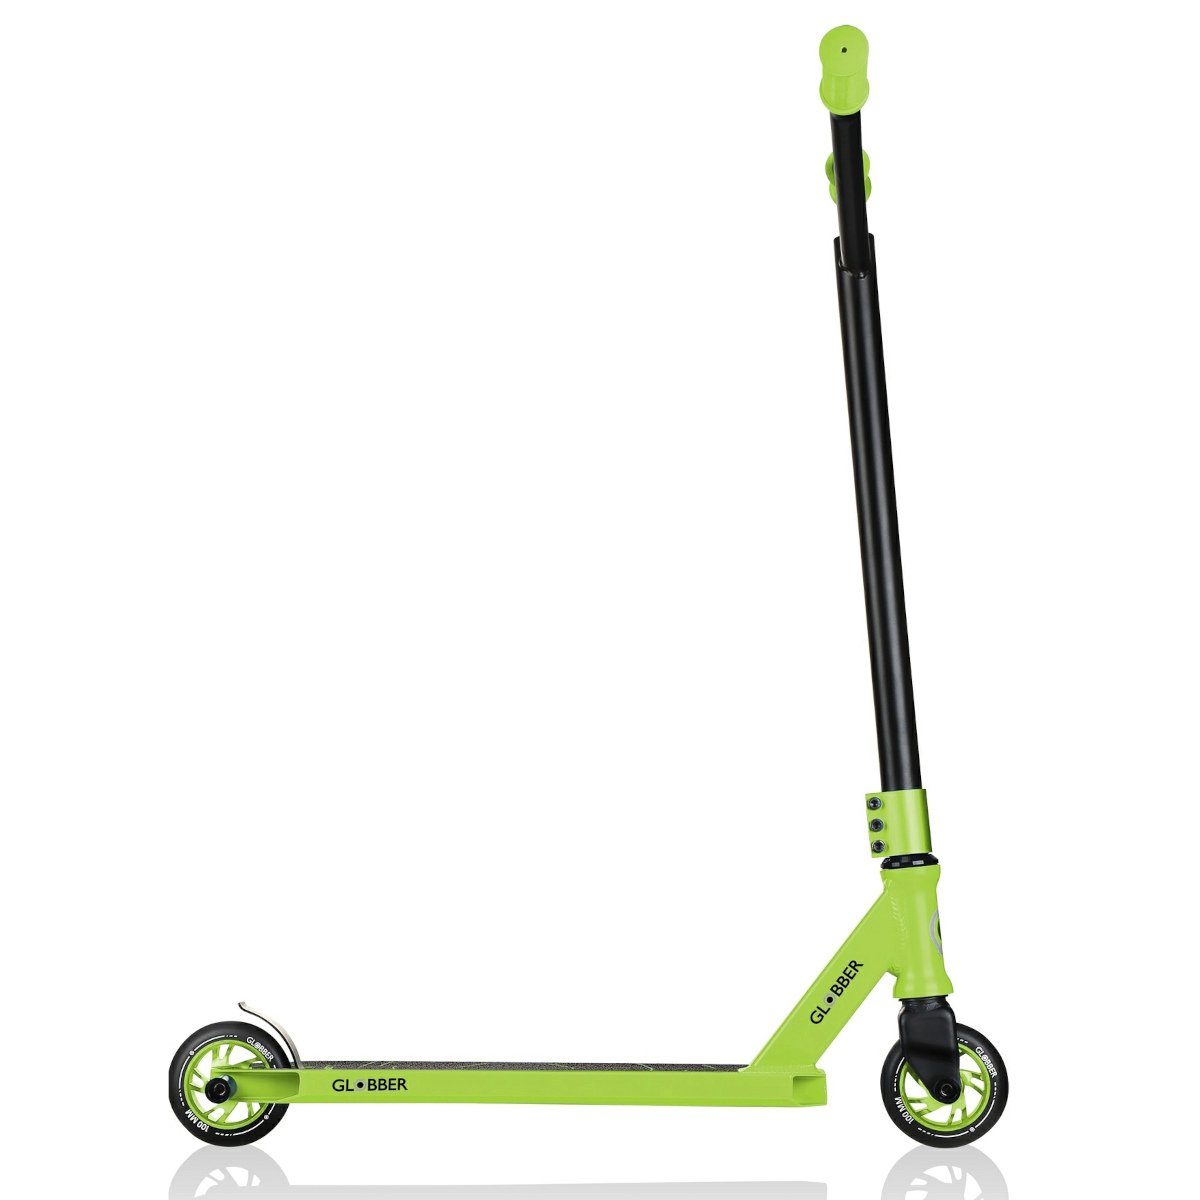 540 GS & authentic Laufrad sports Stuntscooter Schwarz-Lime Authentic toys Grün Globber Sports